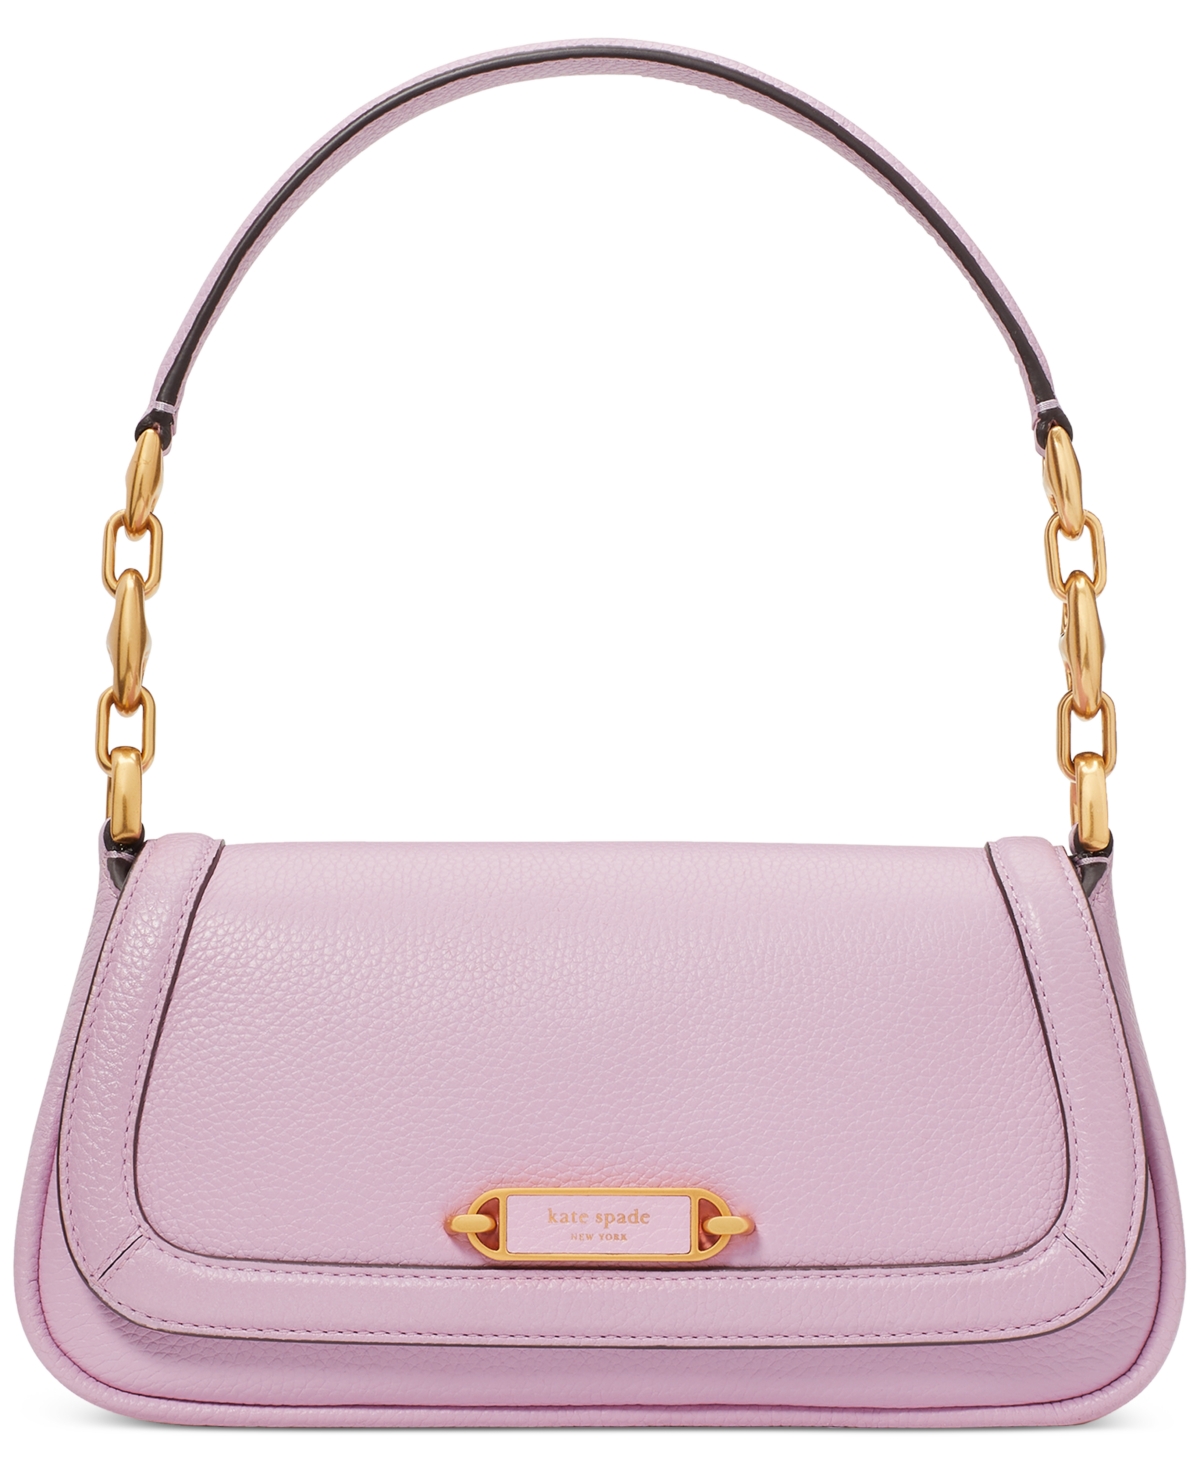 Kate Spade Gramercy Pebbled Leather Flap Shoulder Bag In Berry Cream